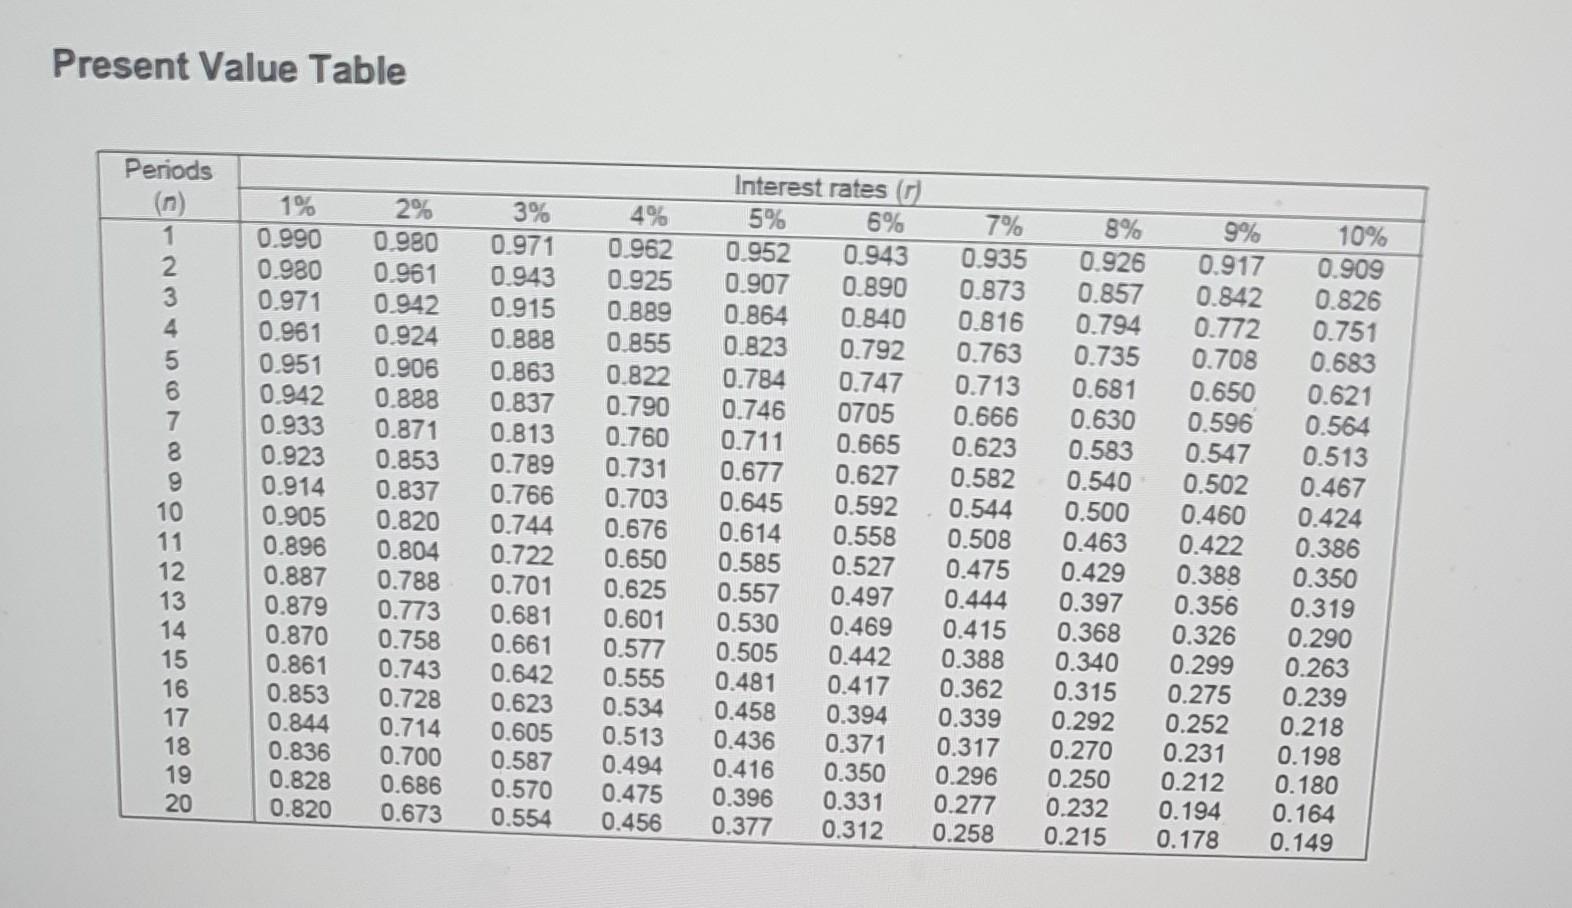 Present Value Table Periods OWN - 12 34 56 78 910 11 12 13 14 15 16 17 18 19 20 Interest rates o 1% 2% 3% 4% 5% 6% 7% 8%